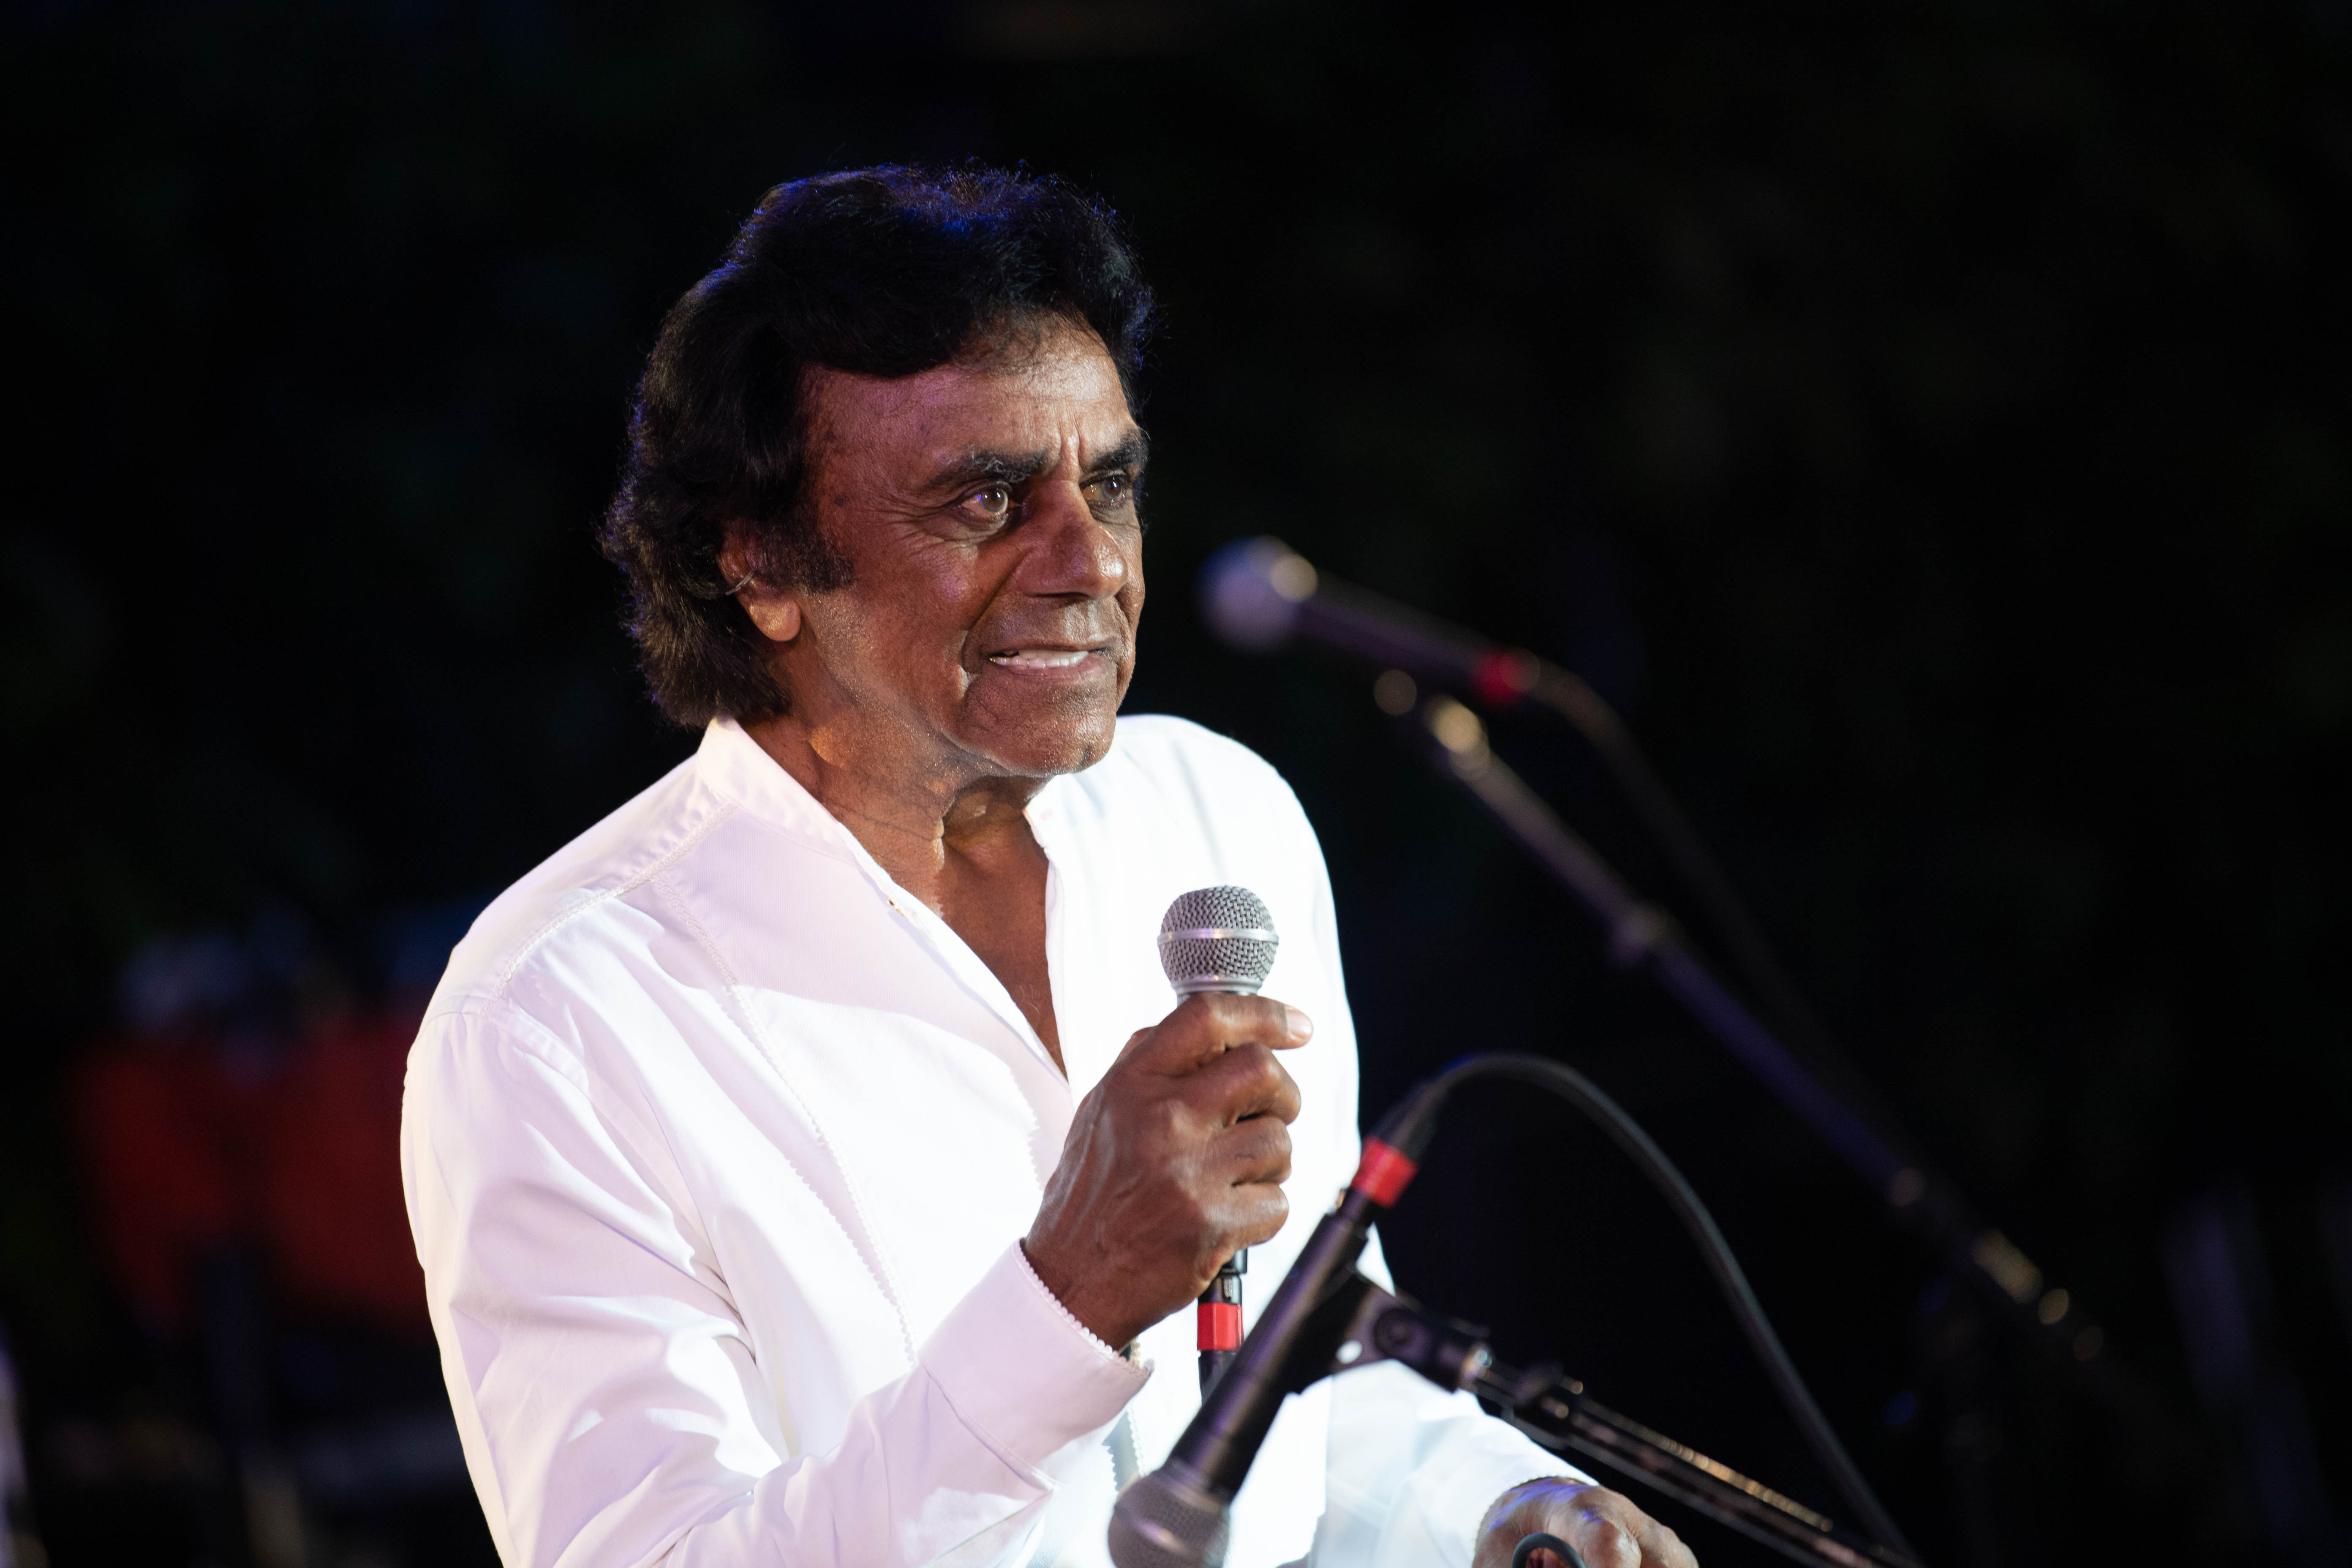 Johnny Mathis at the Eric Marienthal And Friends Jazz Concert Benefiting High Hopes Brain Injury Program in 2018 in Newport Beach, California. | Source: Getty Images